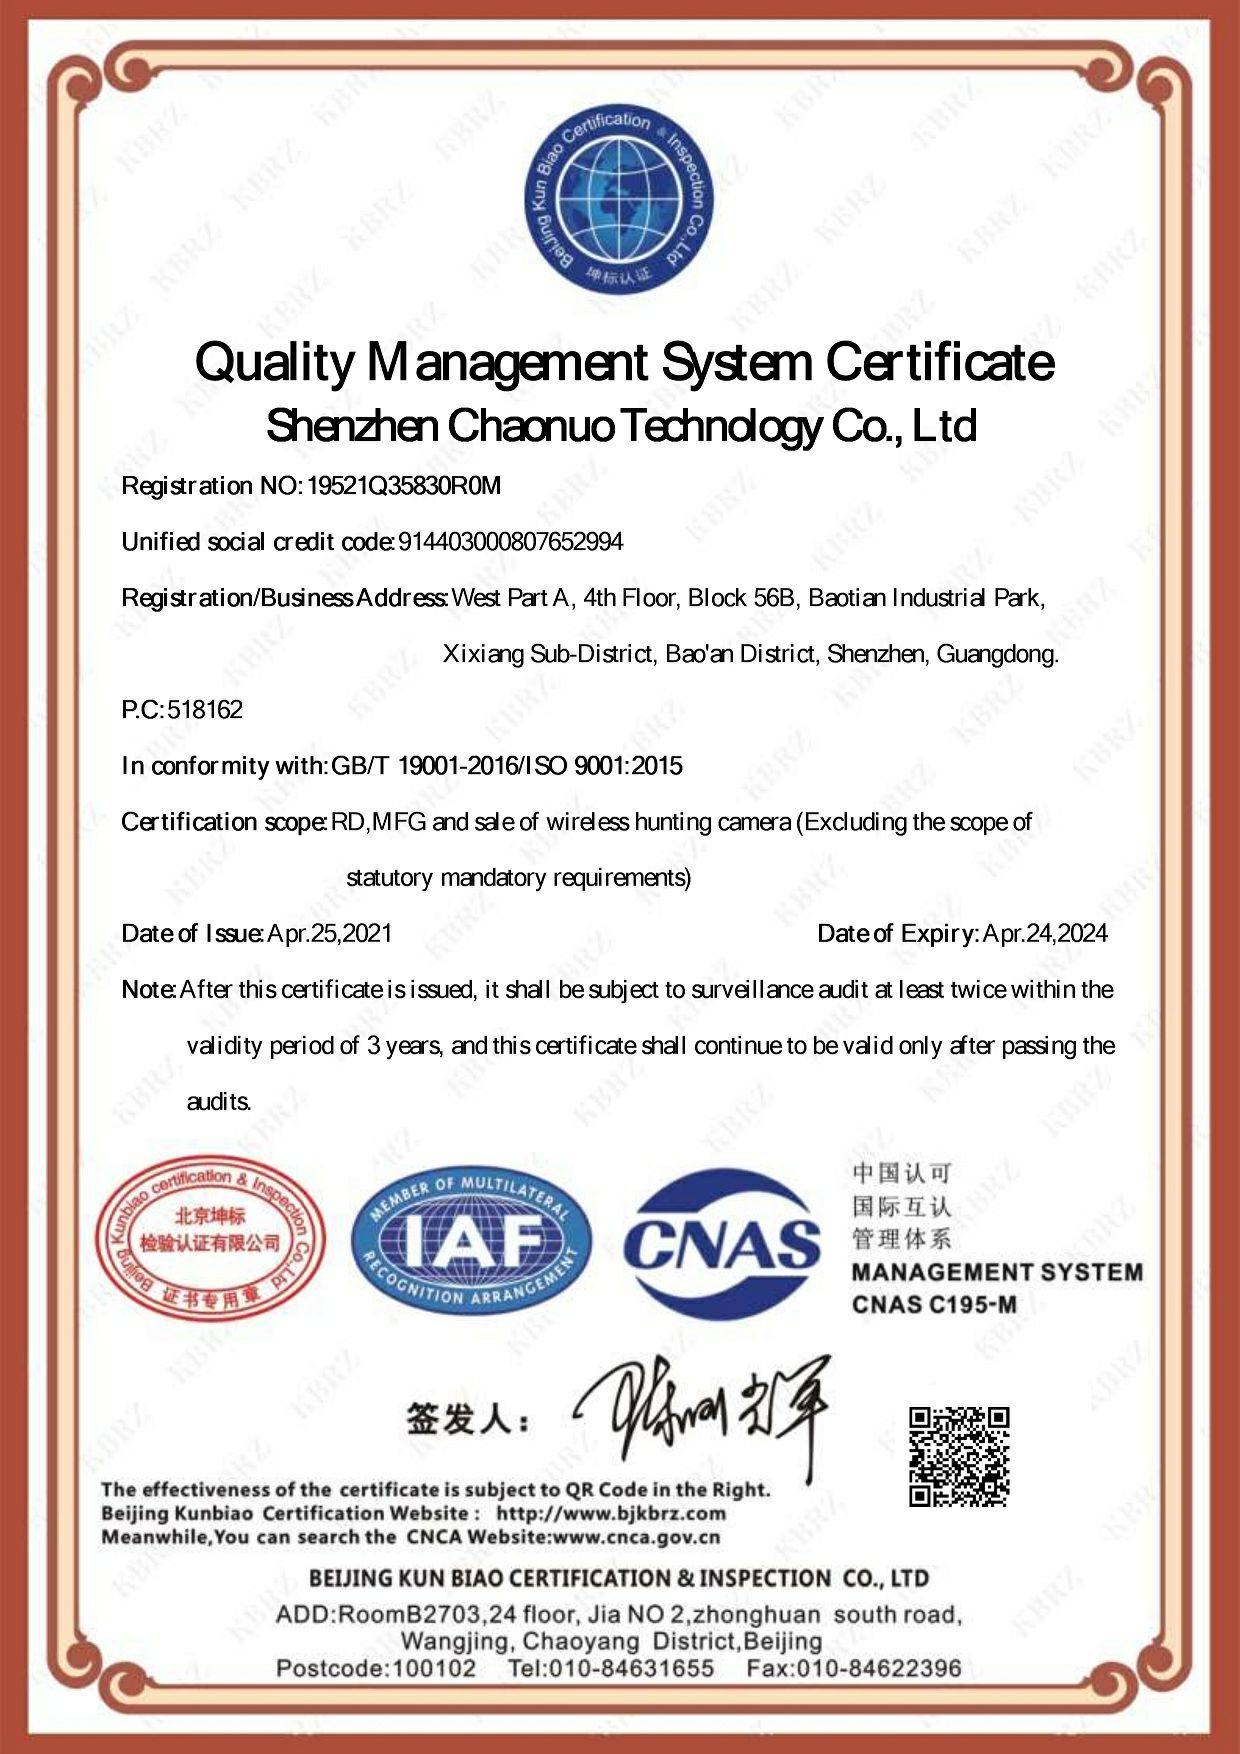 Spomise was granted with Quality Management  System Certification